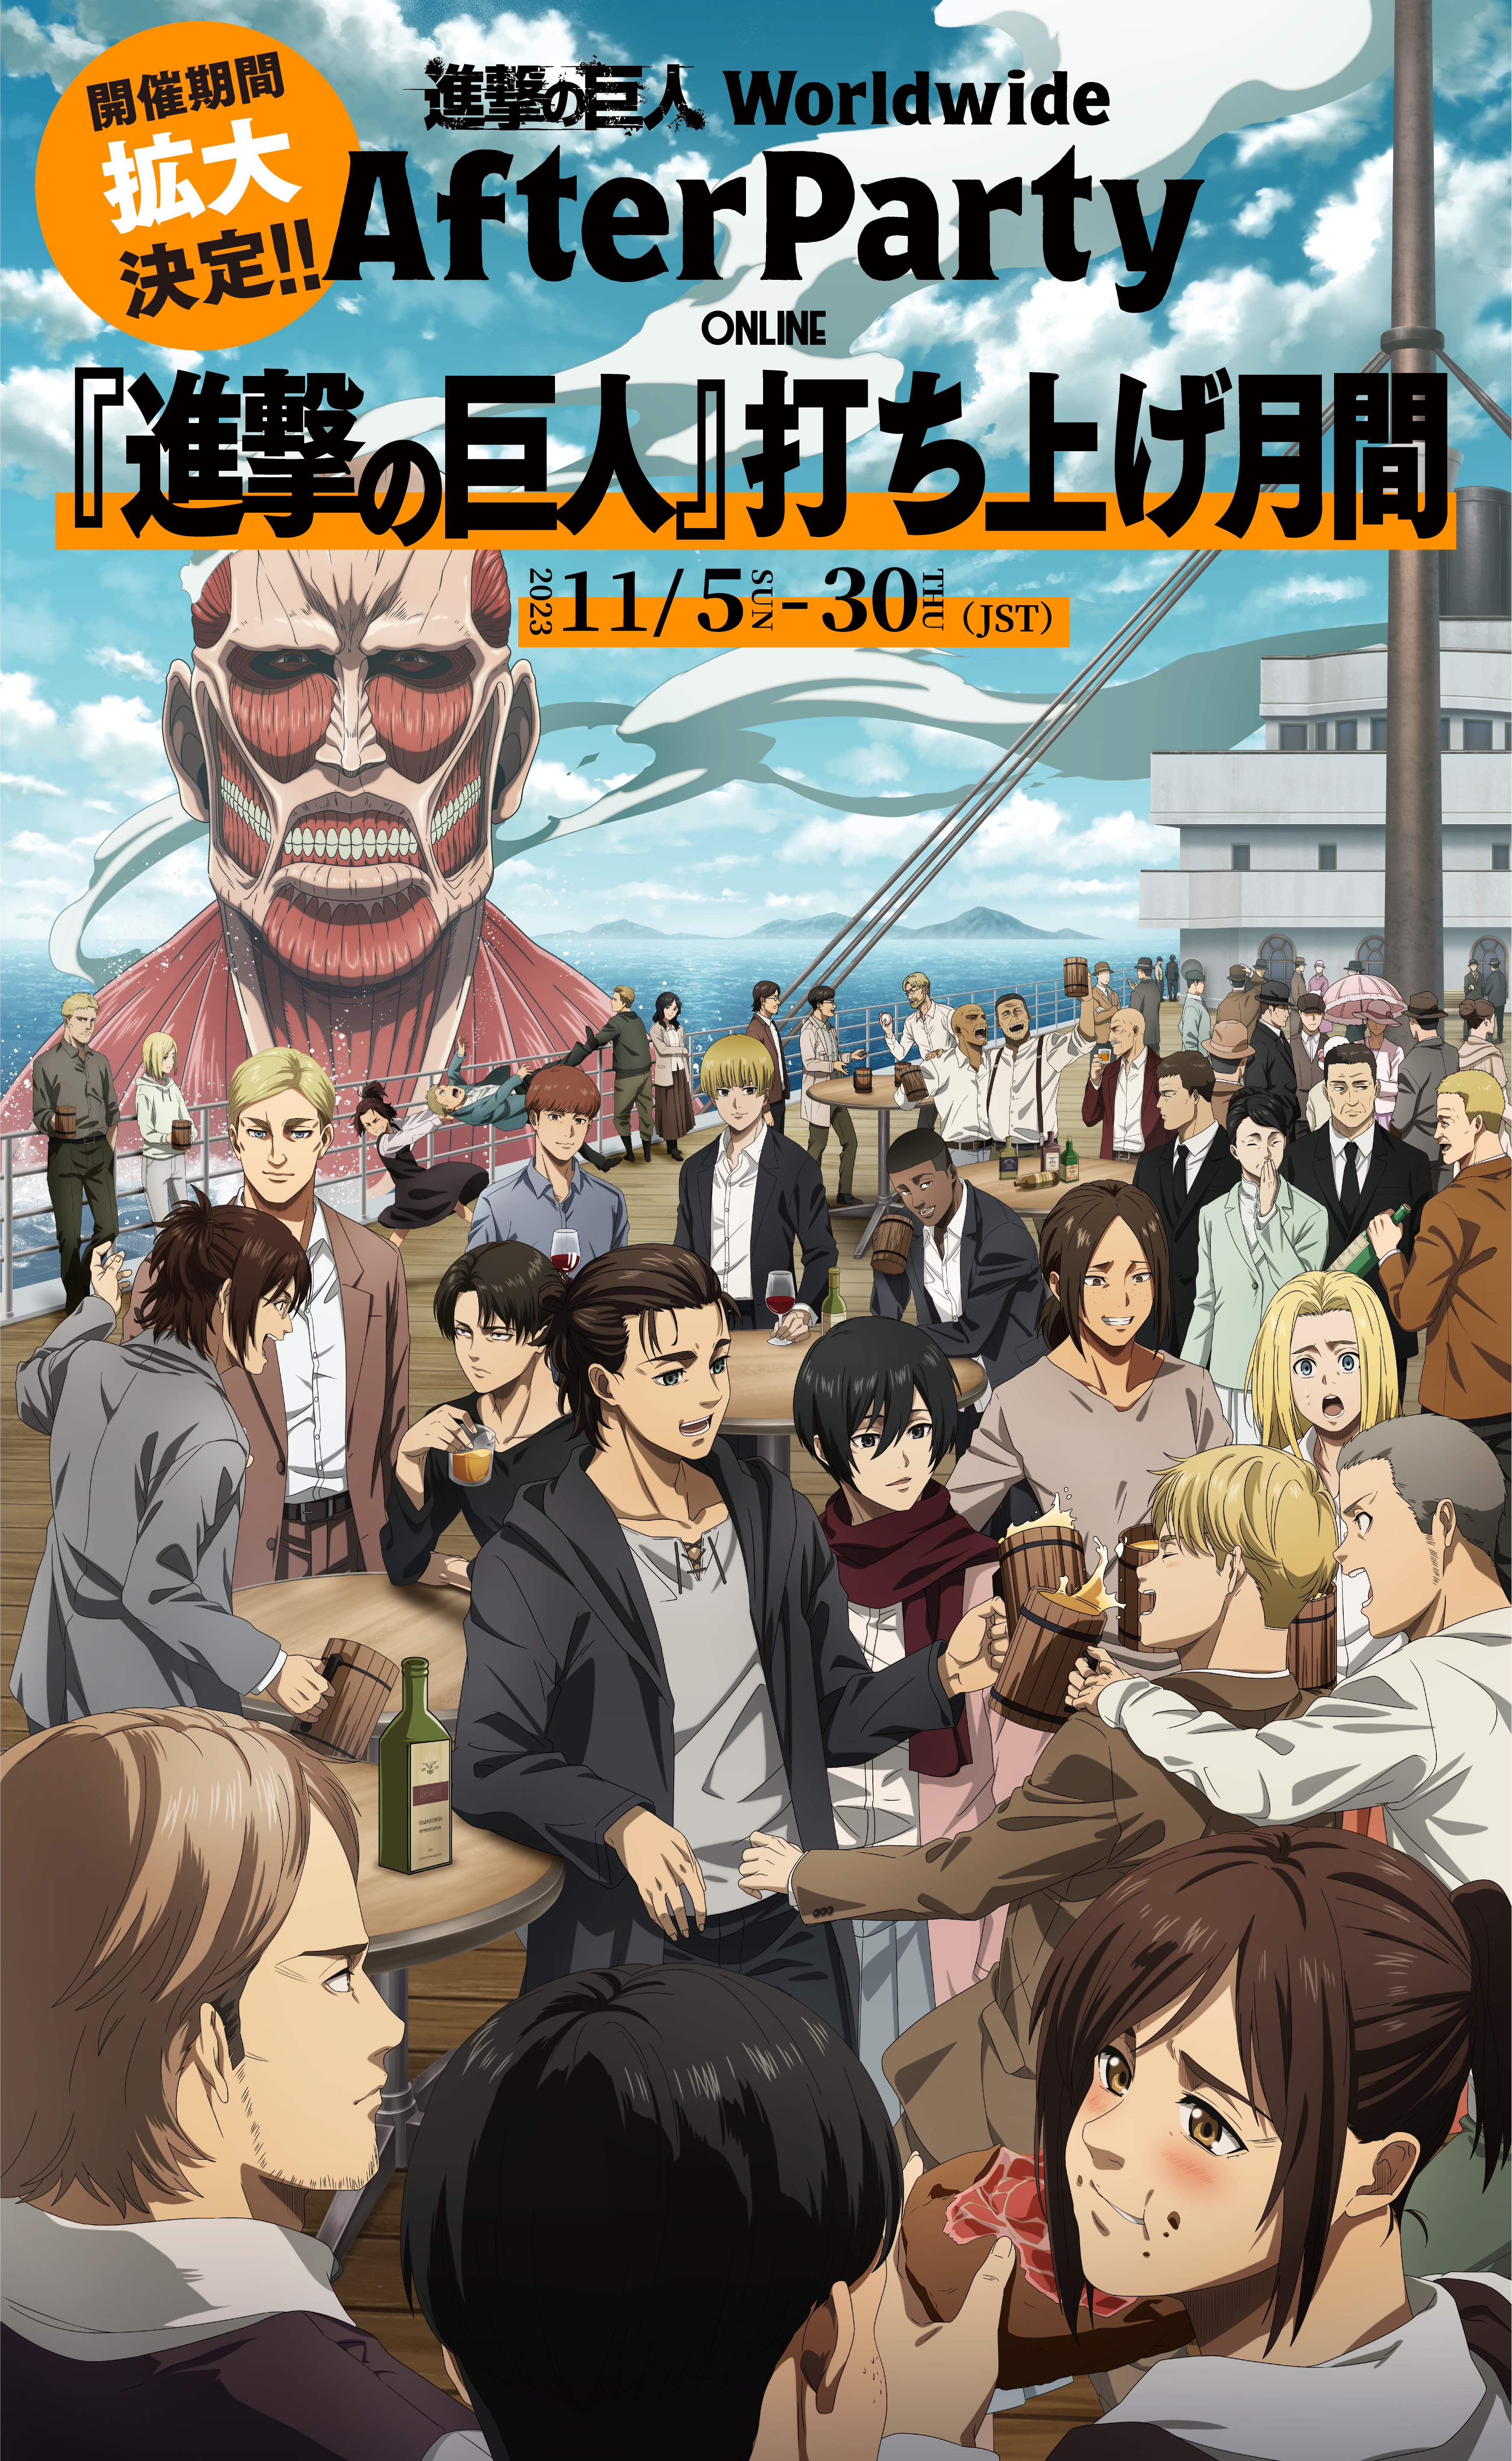 01keyvisual “Attack on Titan” After Party Extended to  End of November Following Positive Response. Official E-Commerce Site Also Open!